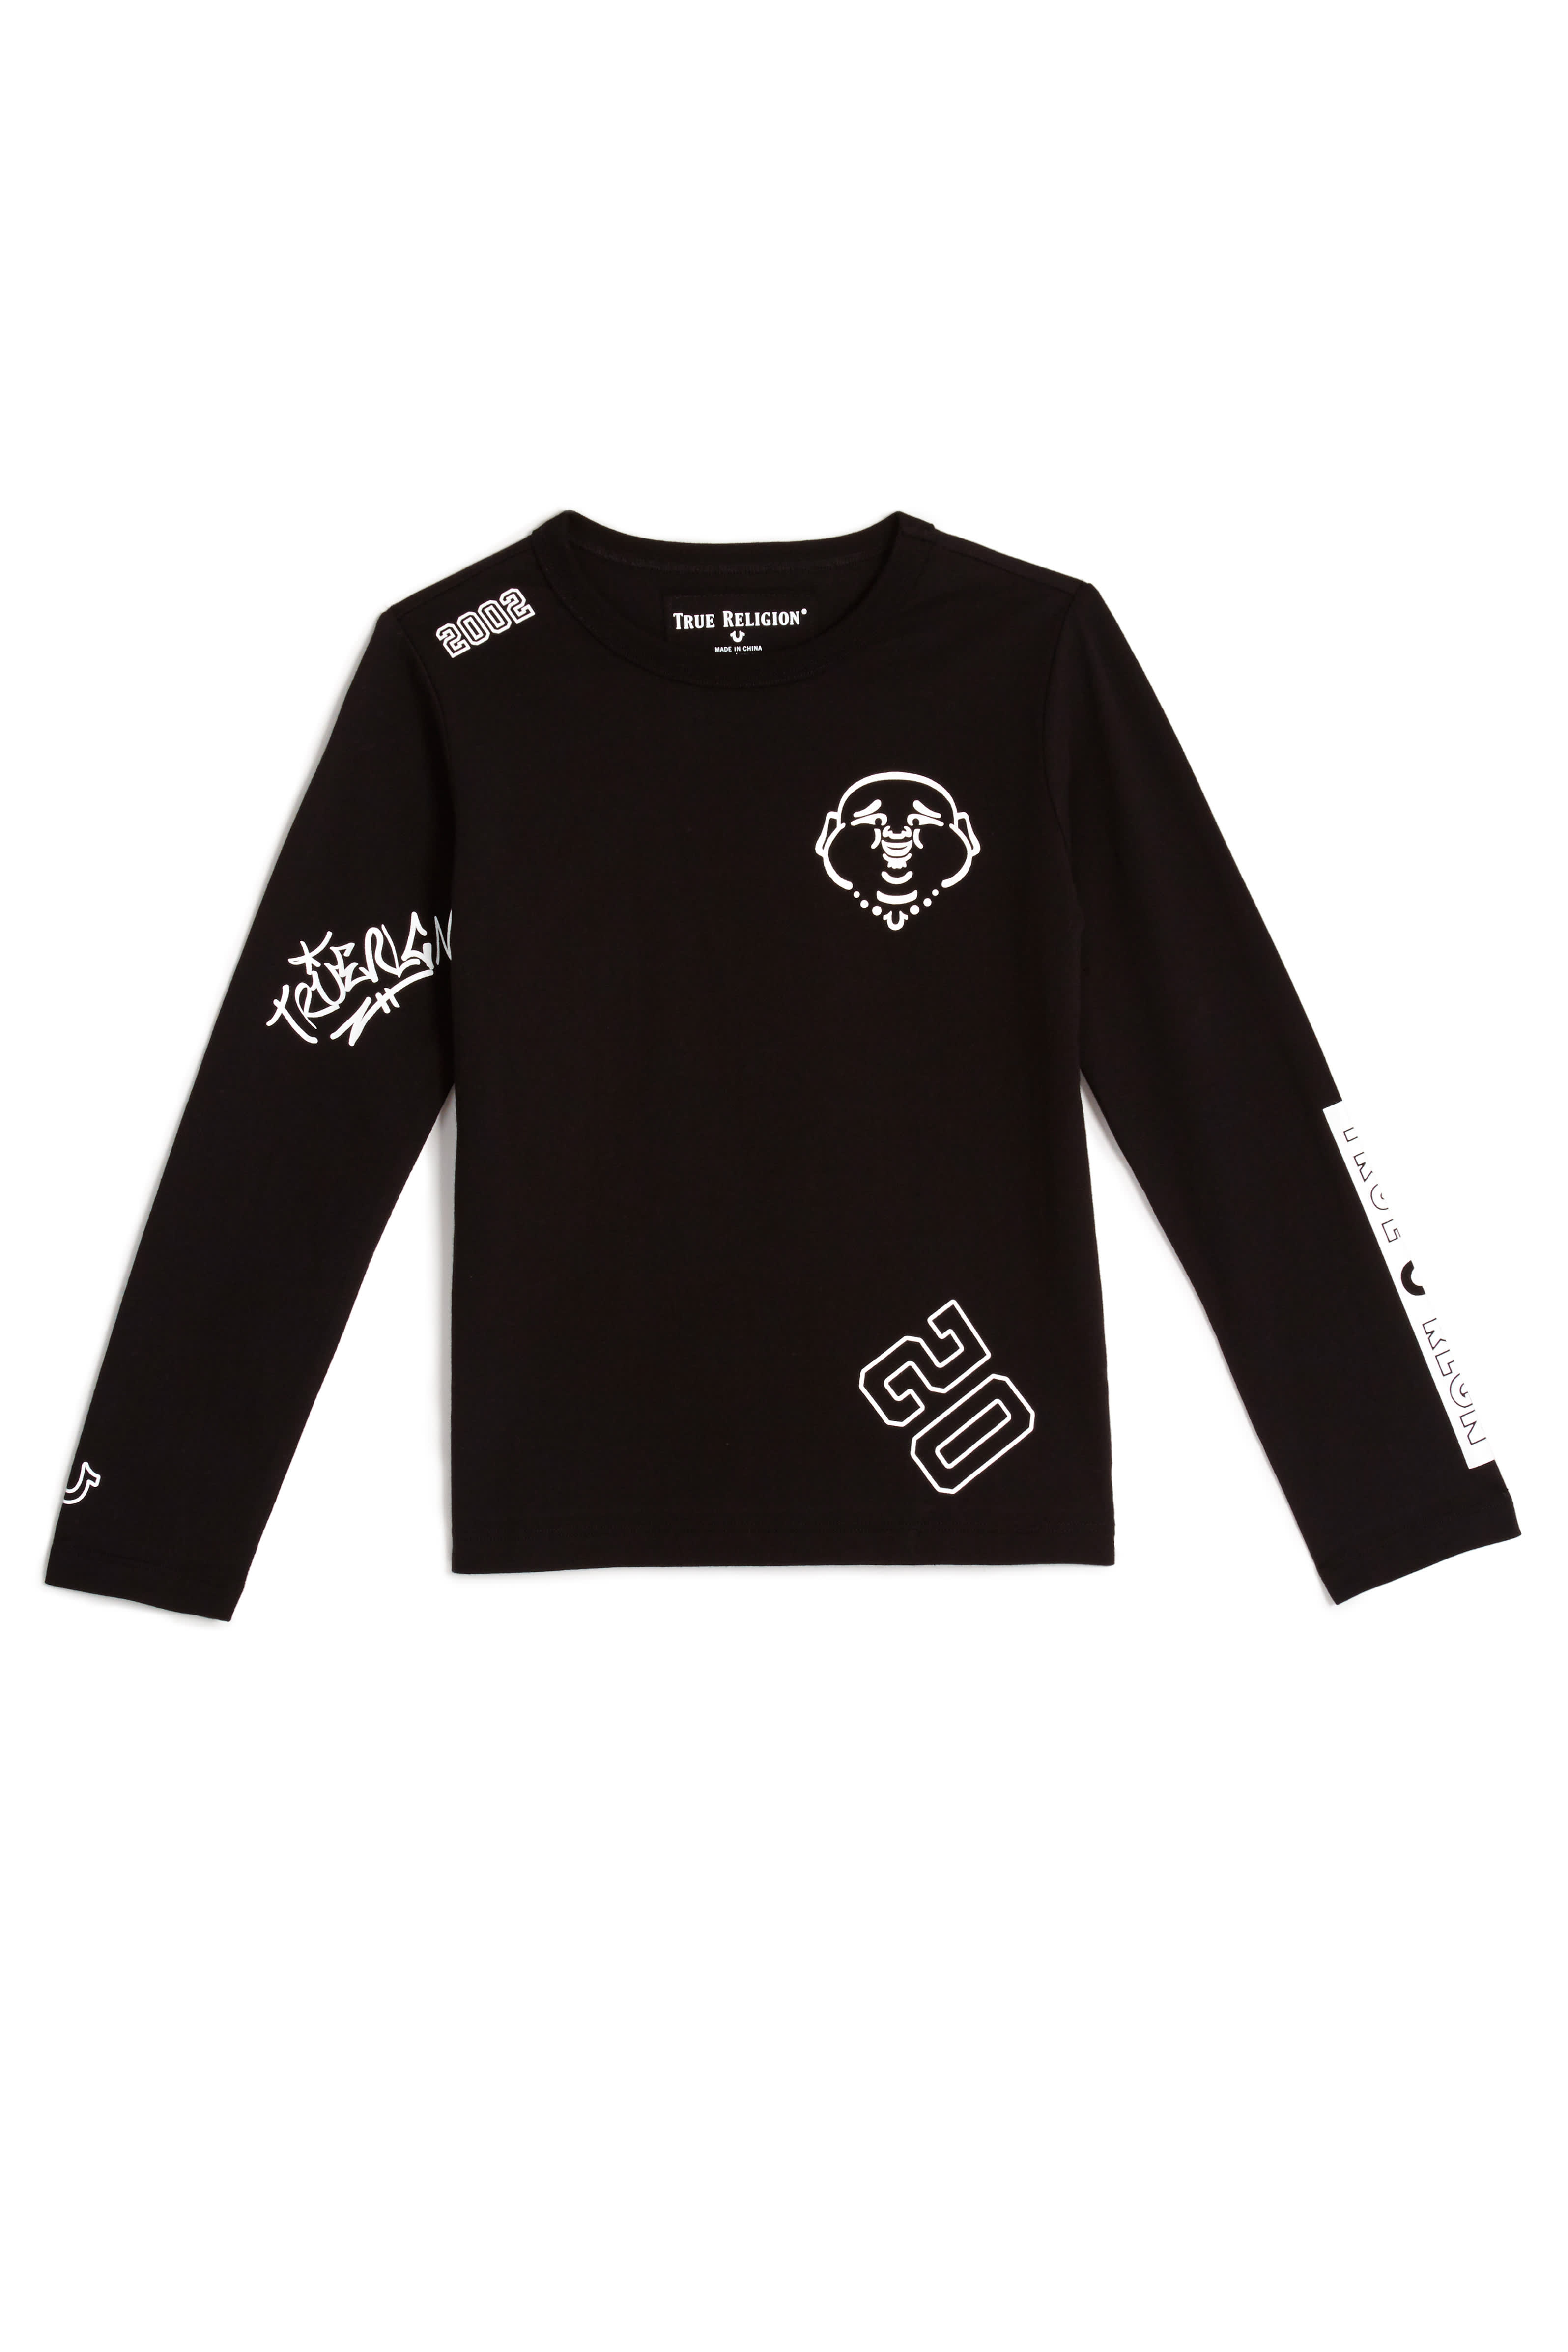 TODDLER/LITTLE KIDS TAGGED GRAPHIC LONG SLEEVE SHIRT